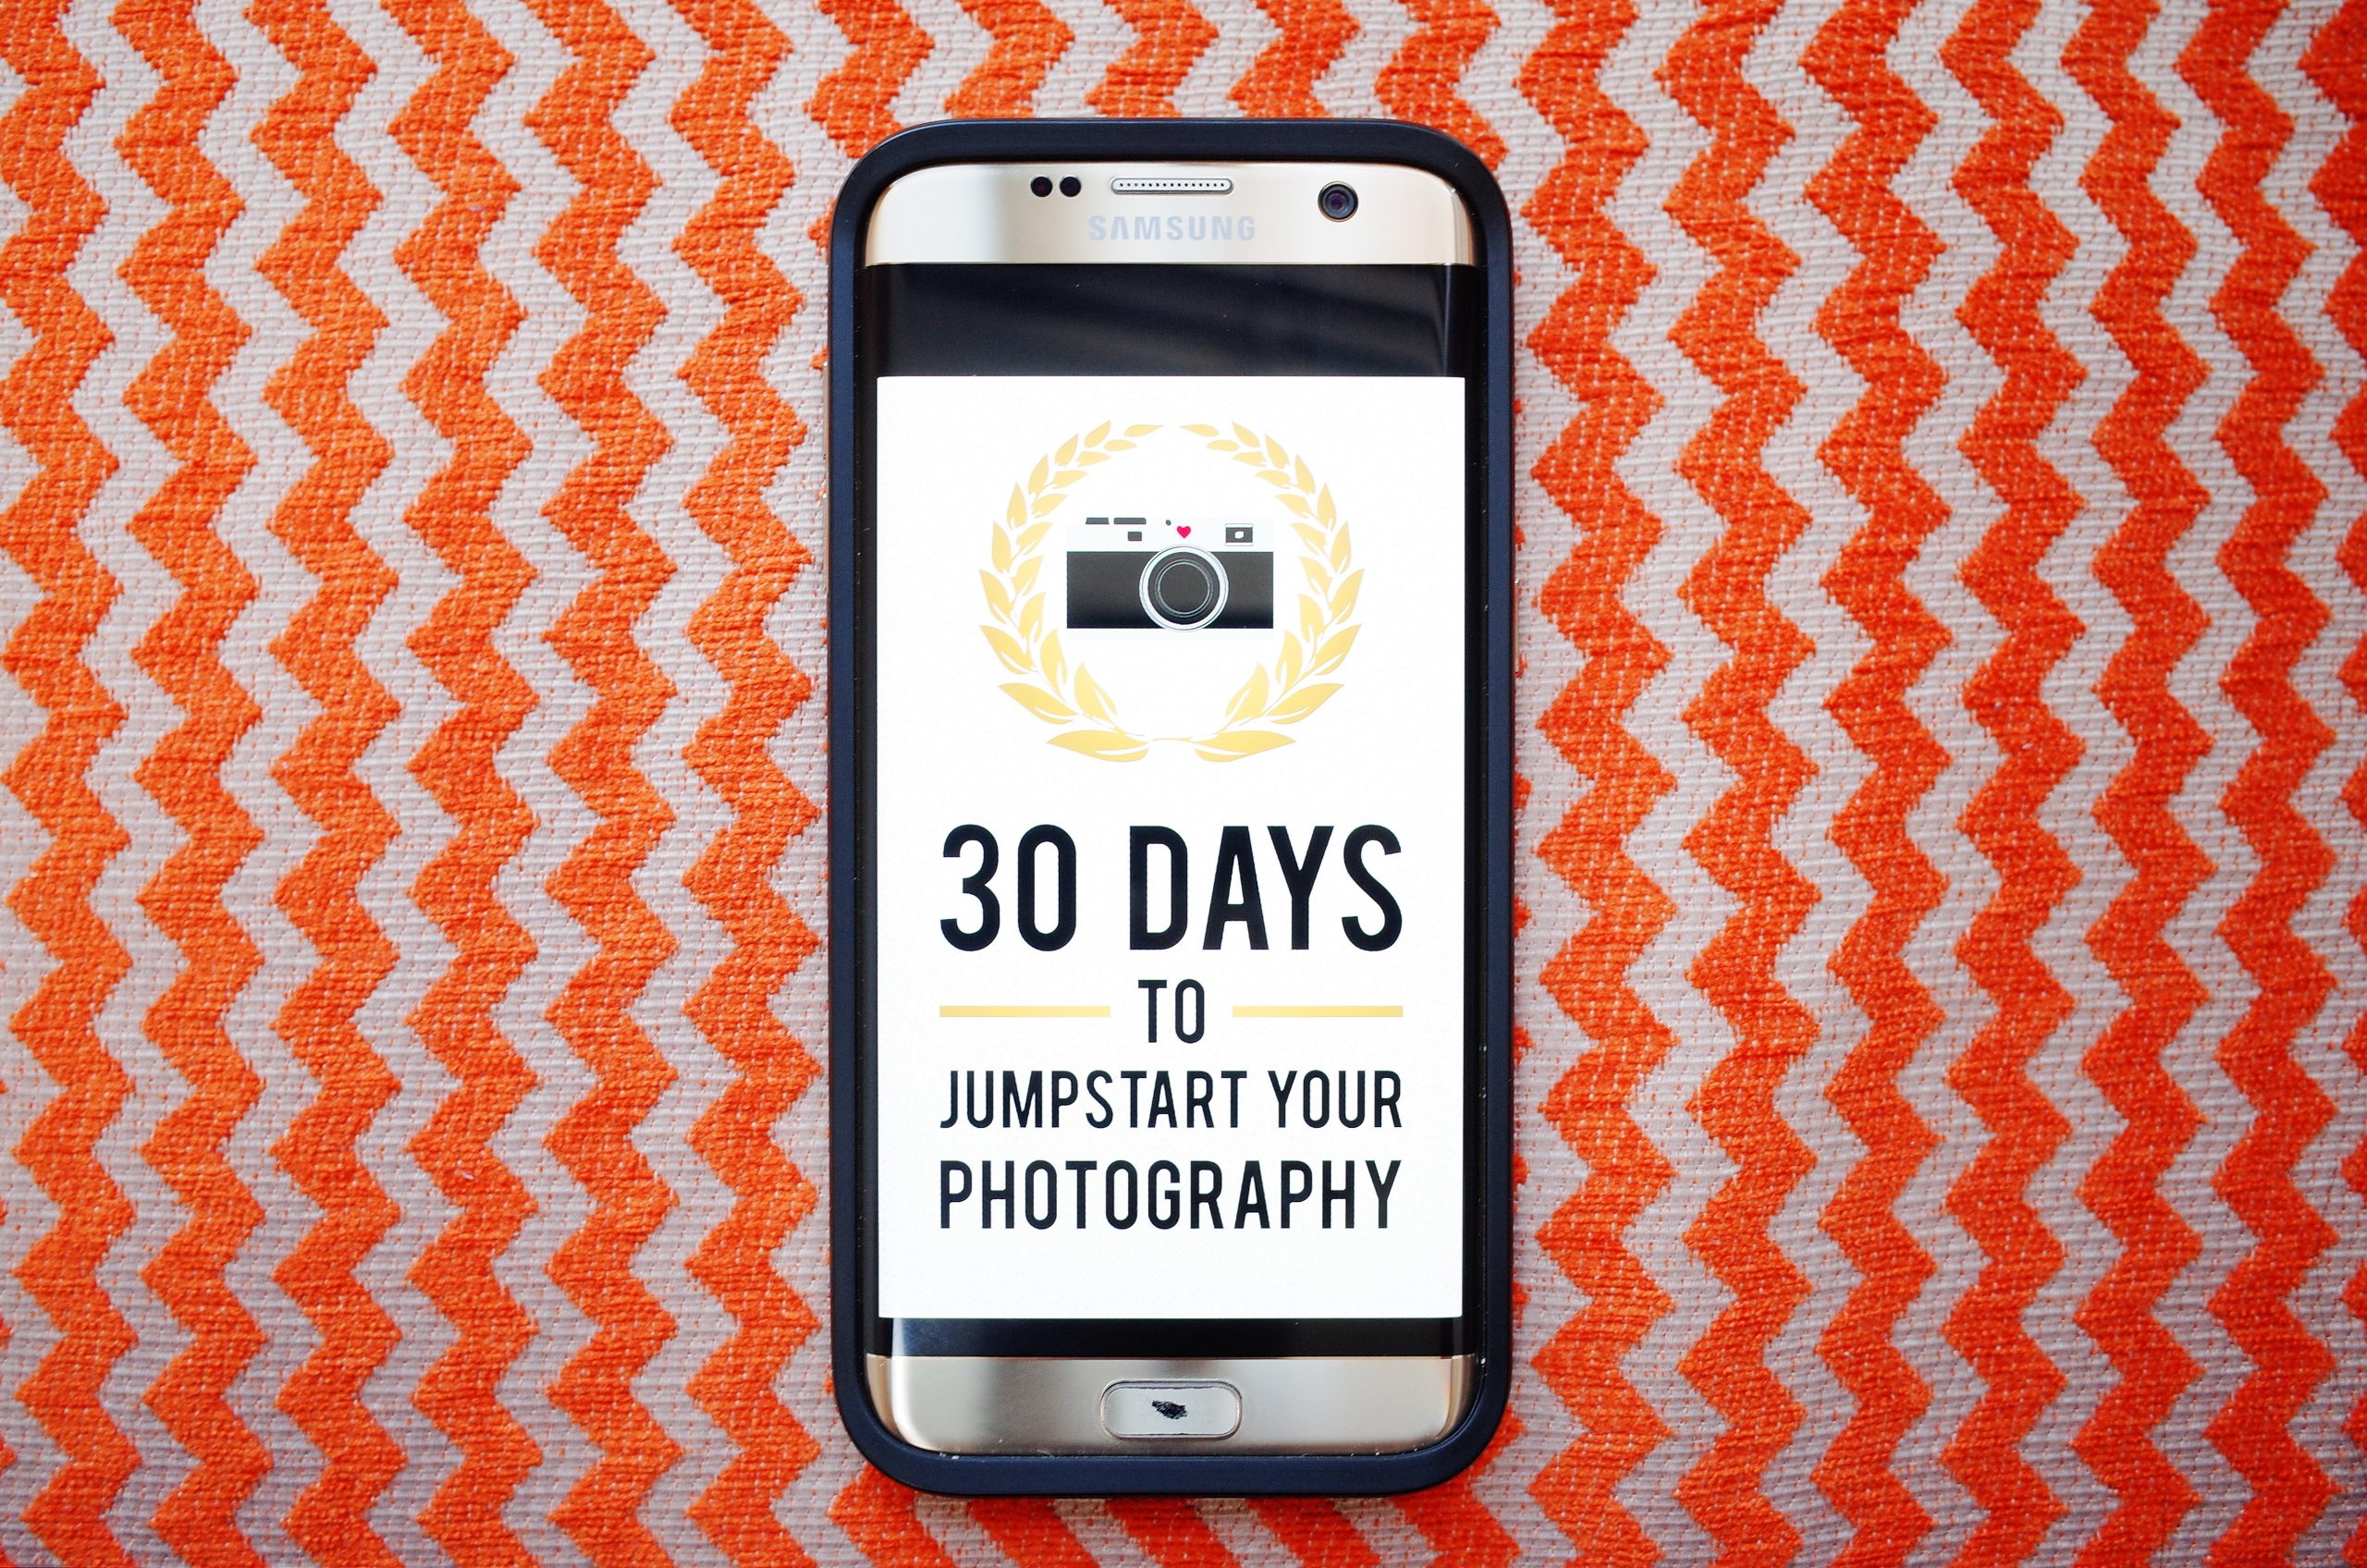 Inspire yourself with our new book: 30 DAYS TO JUMPSTART YOUR PHOTOGRAPHY